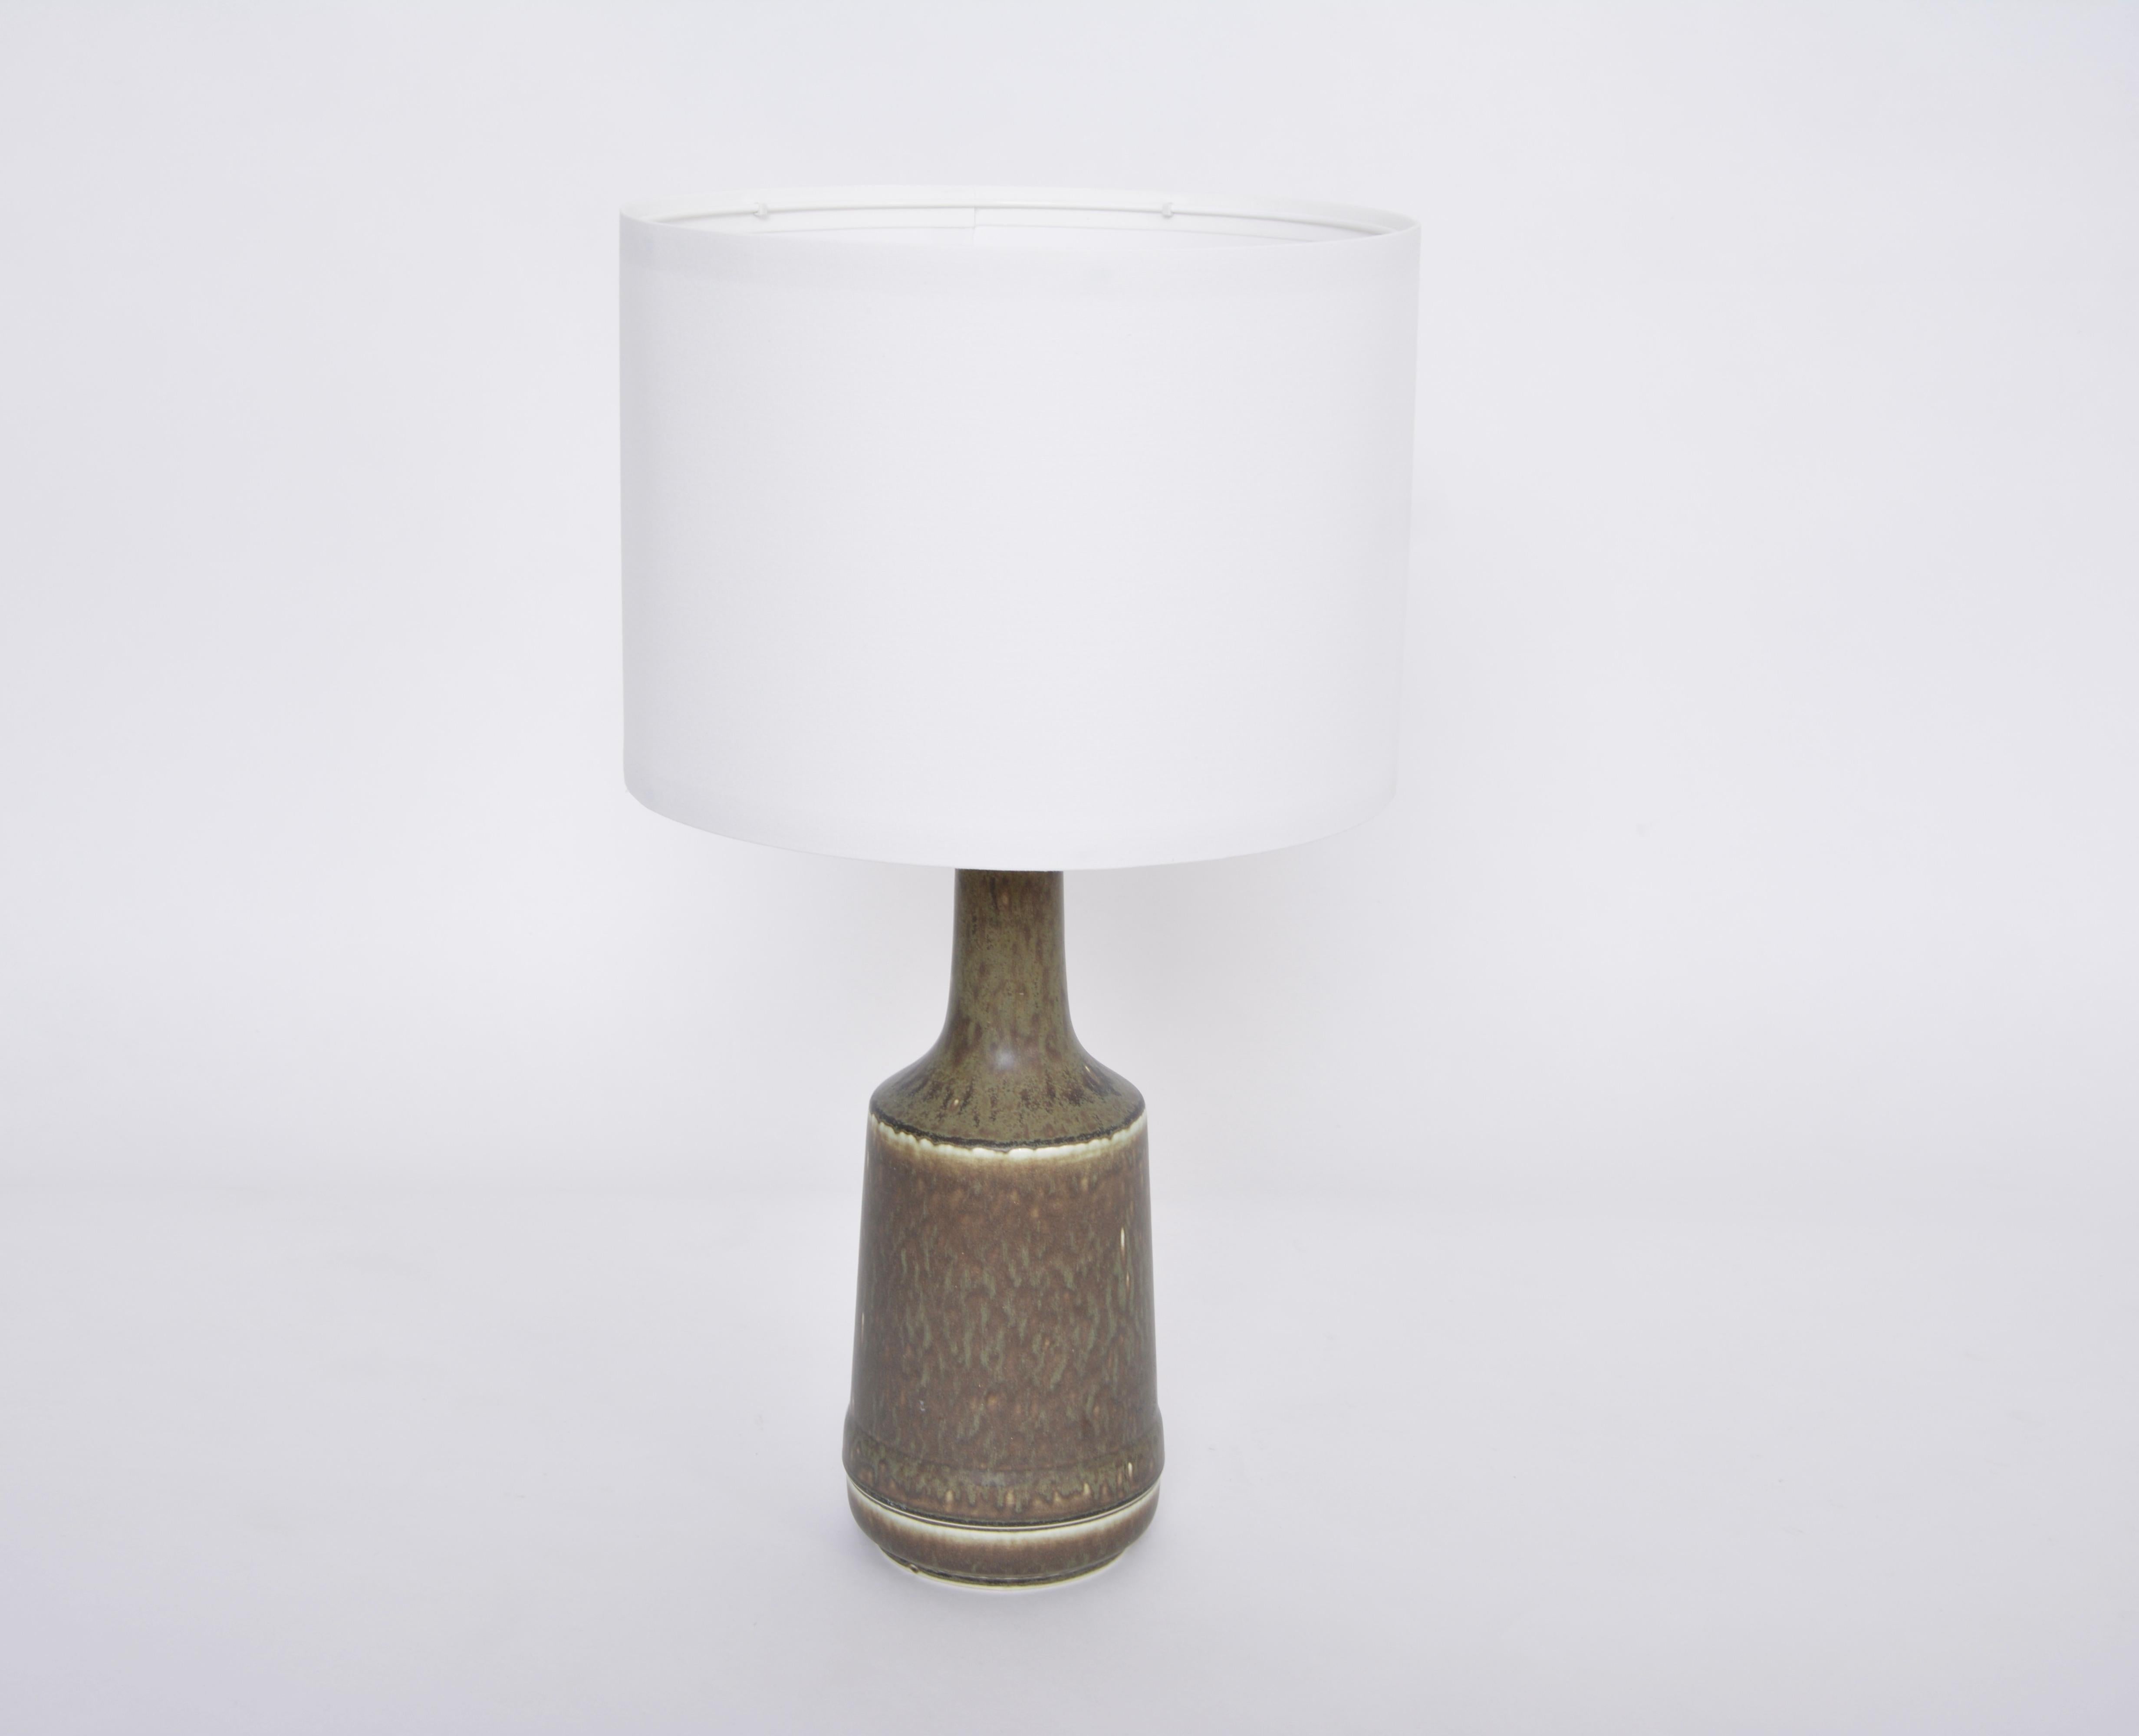 Danish Mid-Century Modern Ceramic Table Lamp by Desiree Stentoj
This lamp was produced by Danish company Desiree Stentoj probably in the 1960s. The lamp is made of glazed stoneware. It has a beautiful glazing in tones of dark green. The base